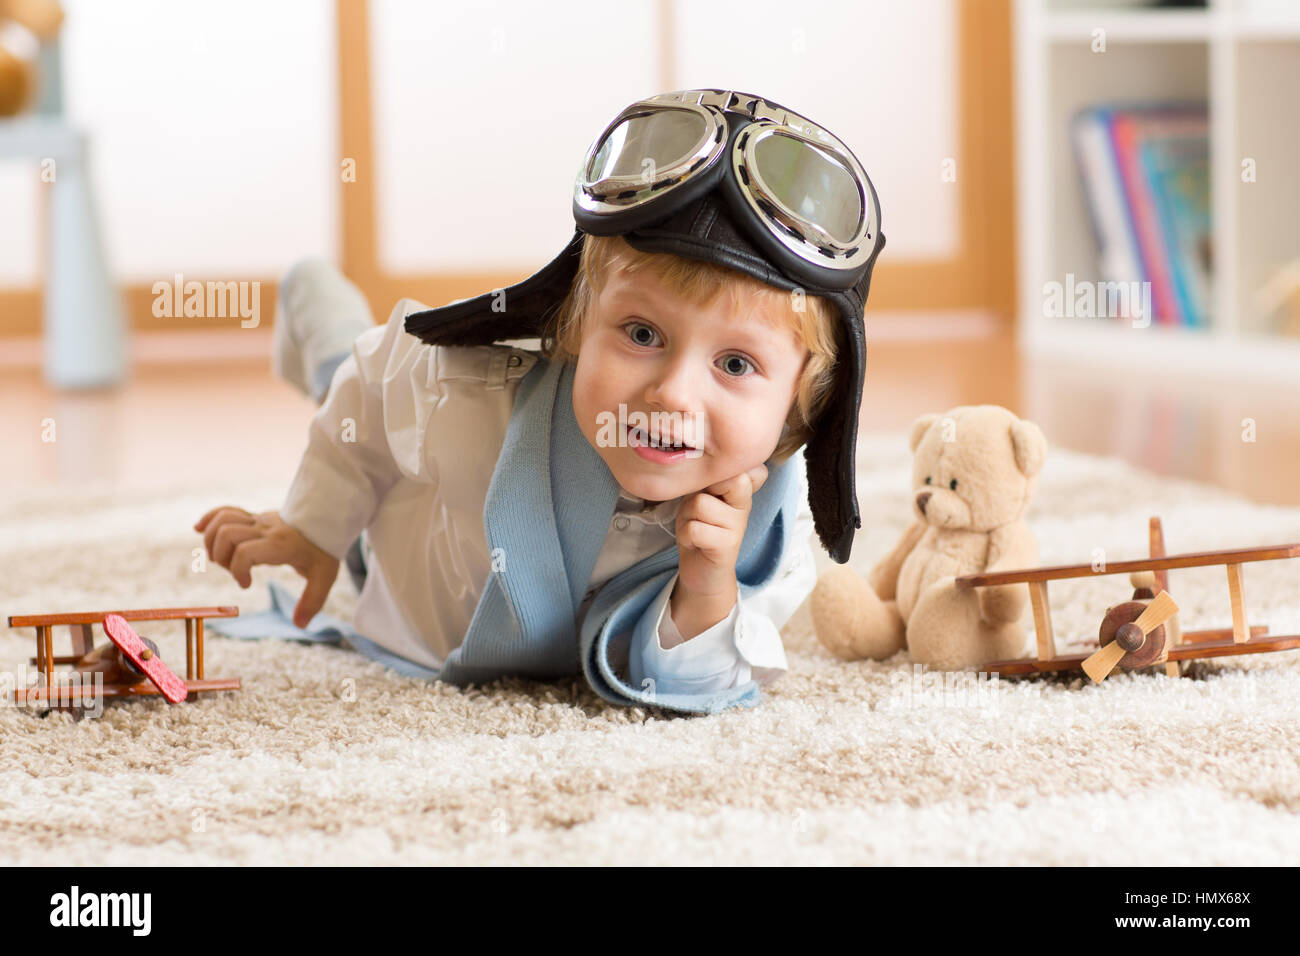 portrait of kid boy playing with wooden airplanes on carpet in nursery room Stock Photo